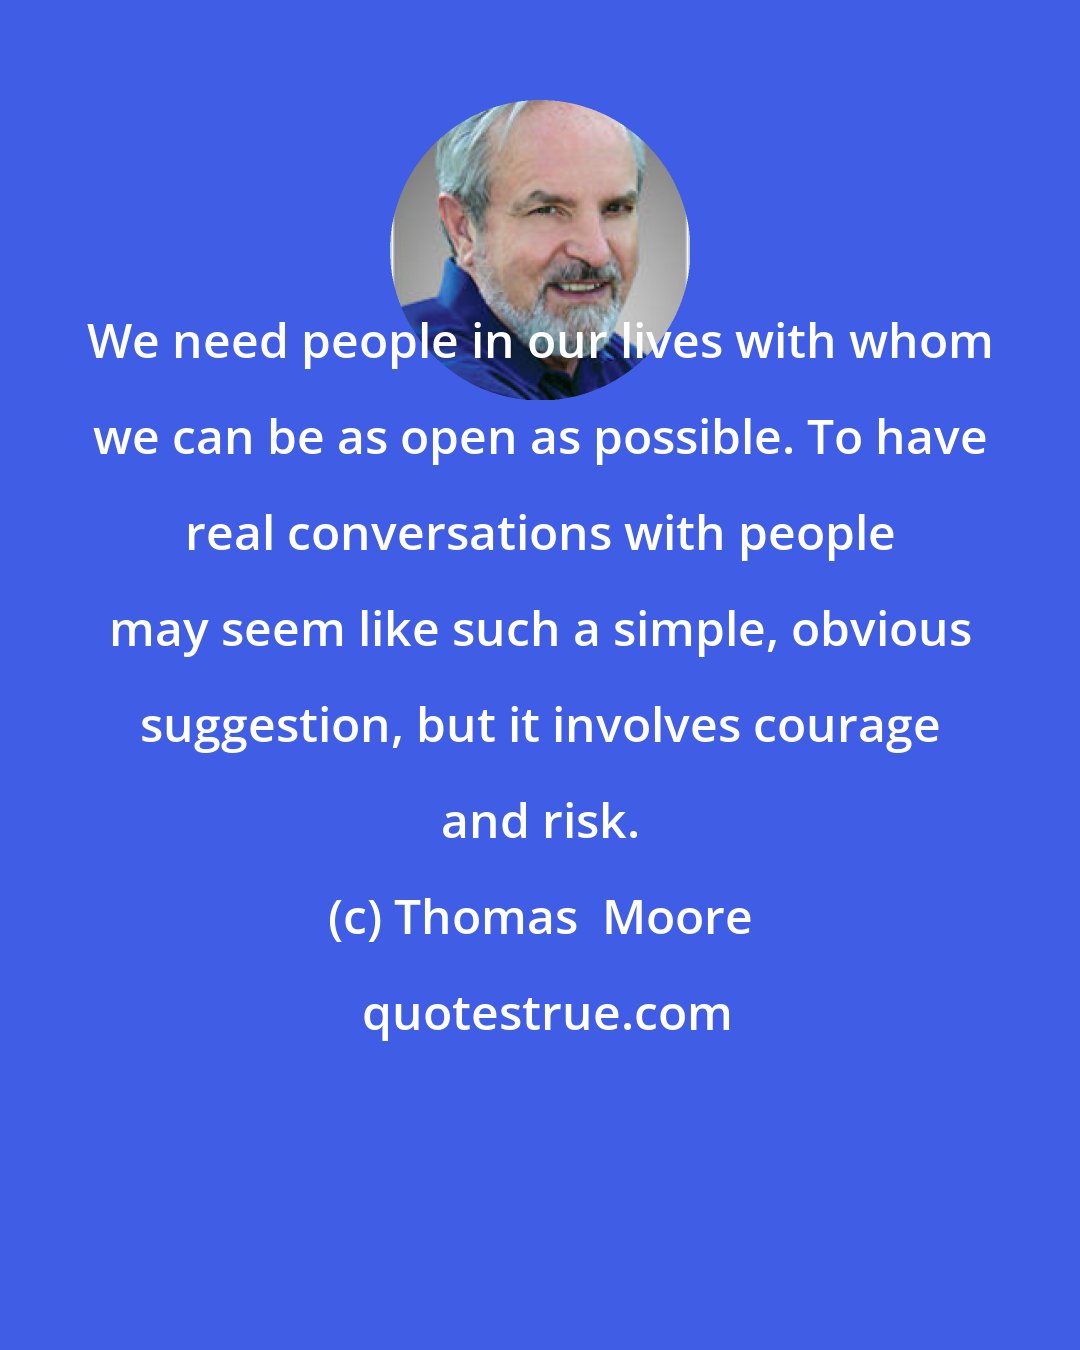 Thomas  Moore: We need people in our lives with whom we can be as open as possible. To have real conversations with people may seem like such a simple, obvious suggestion, but it involves courage and risk.